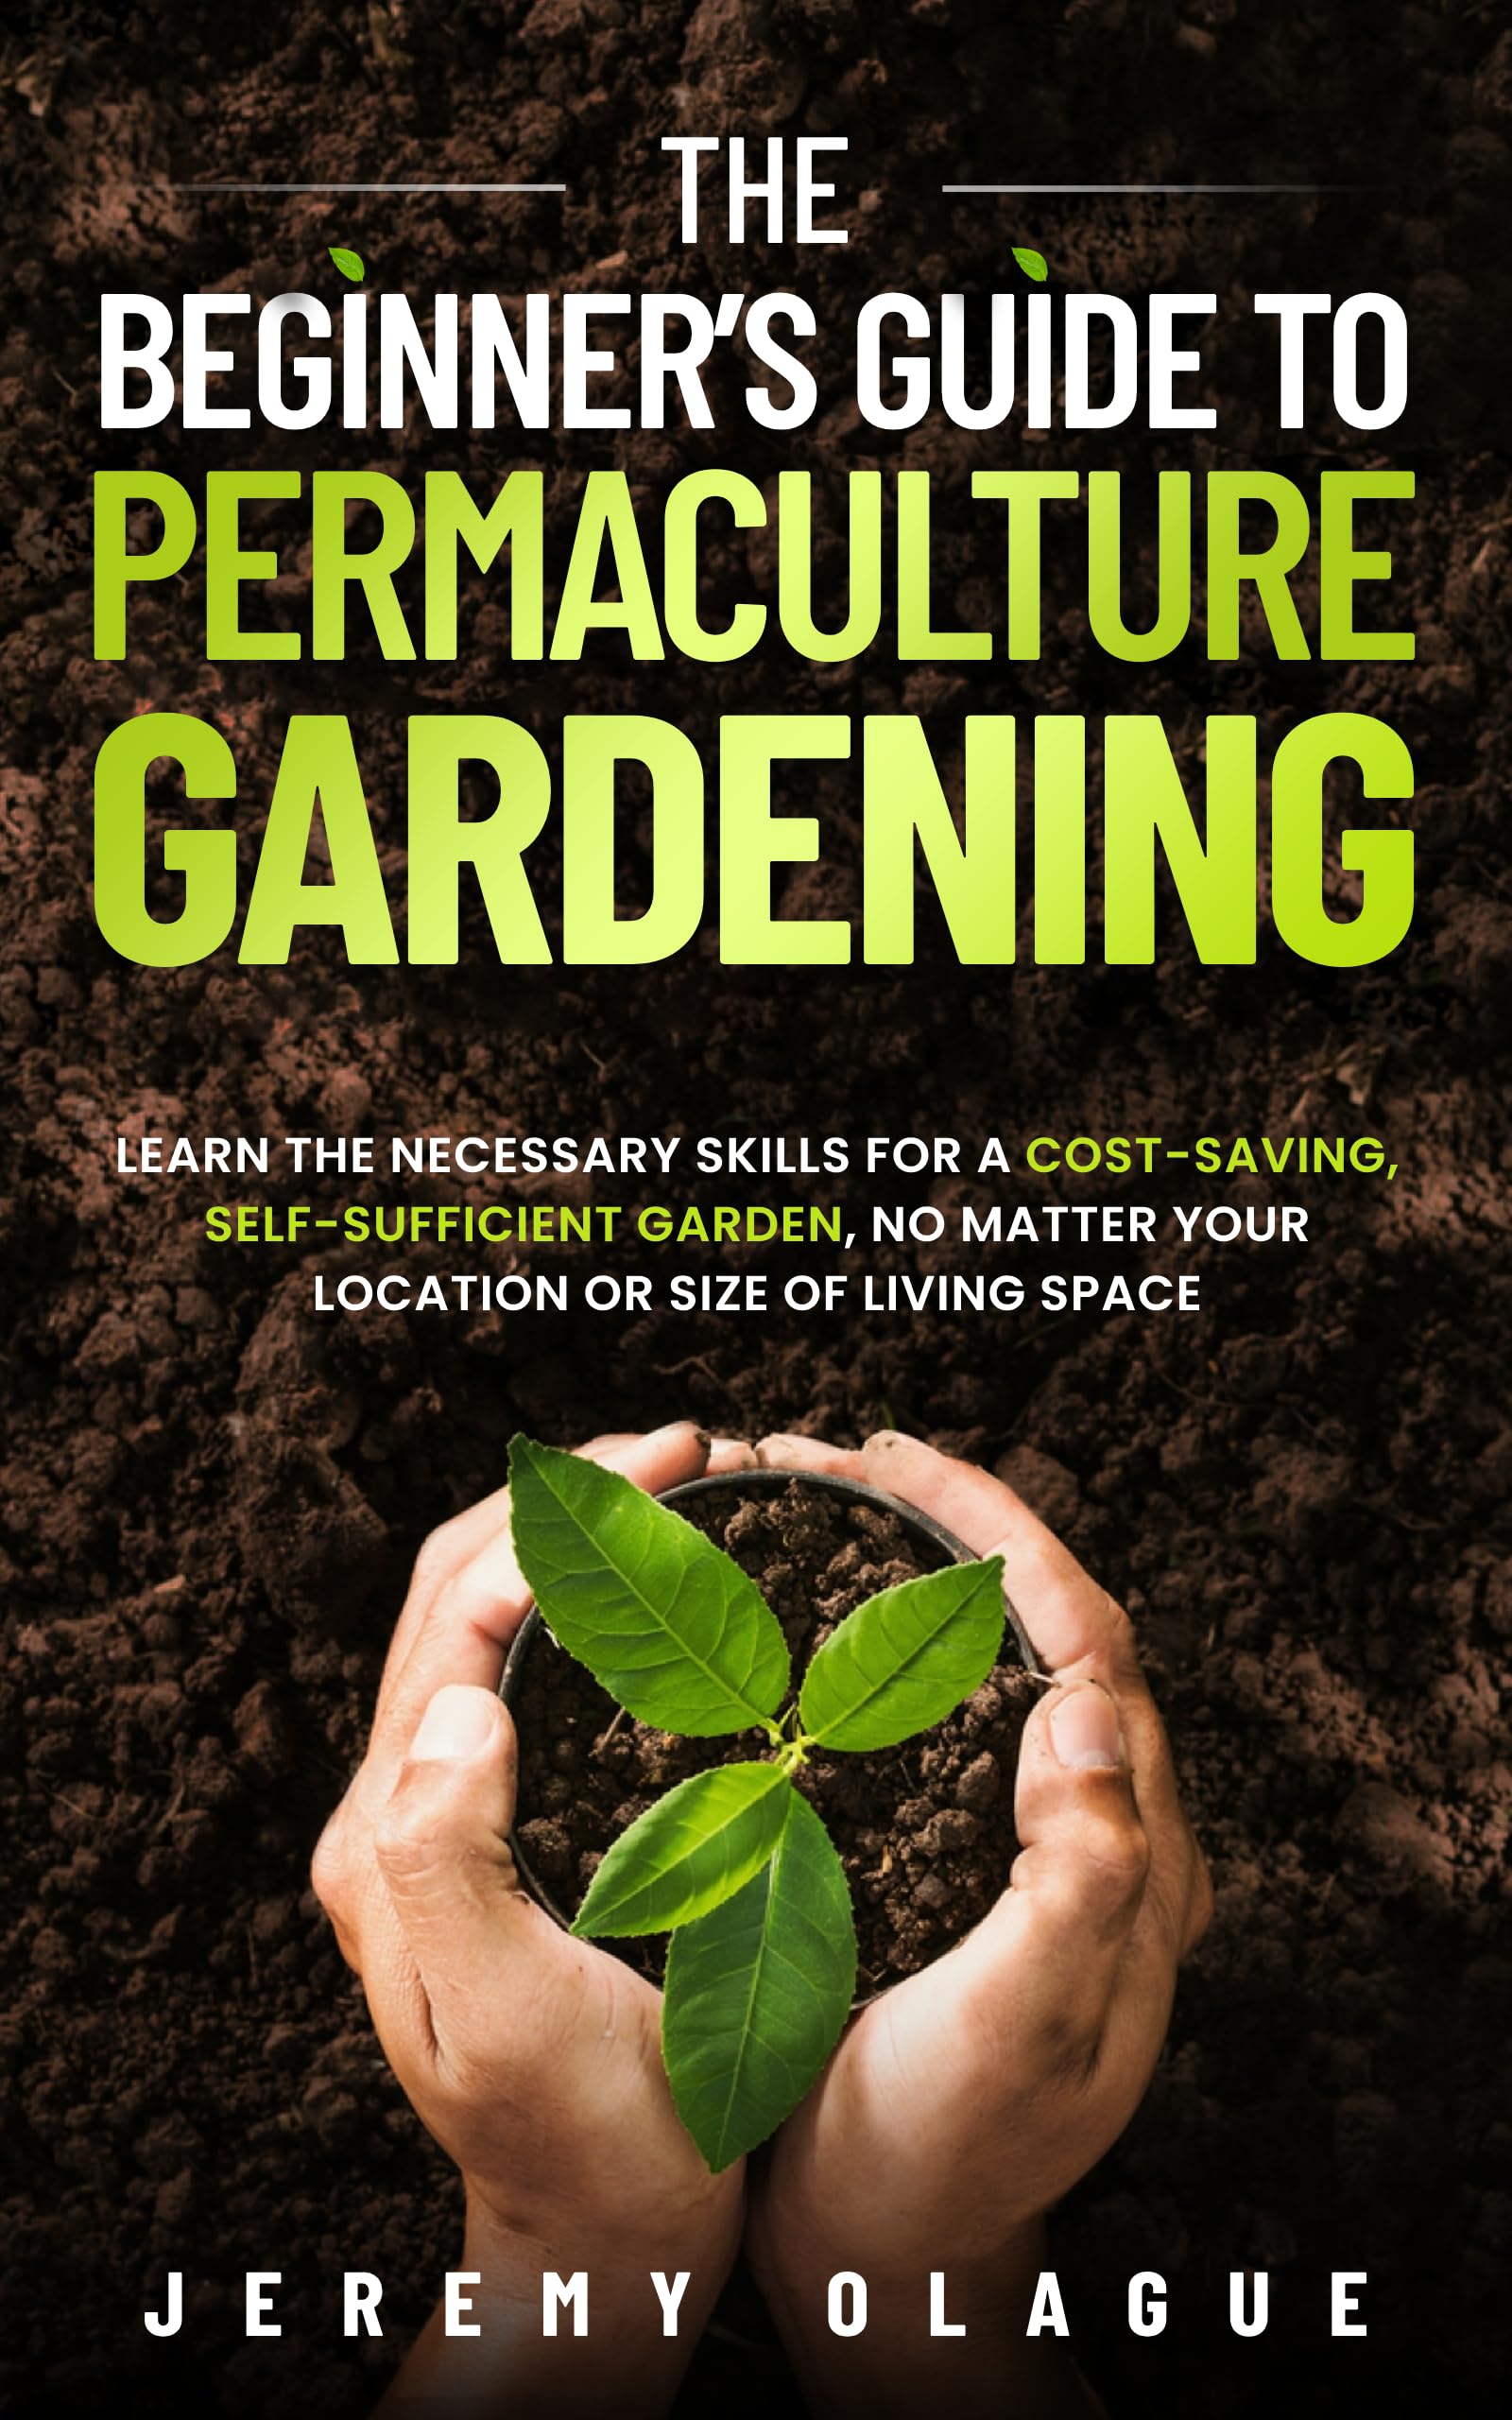 THE BEGINNER’S GUIDE TO PERMACULTURE GARDENING